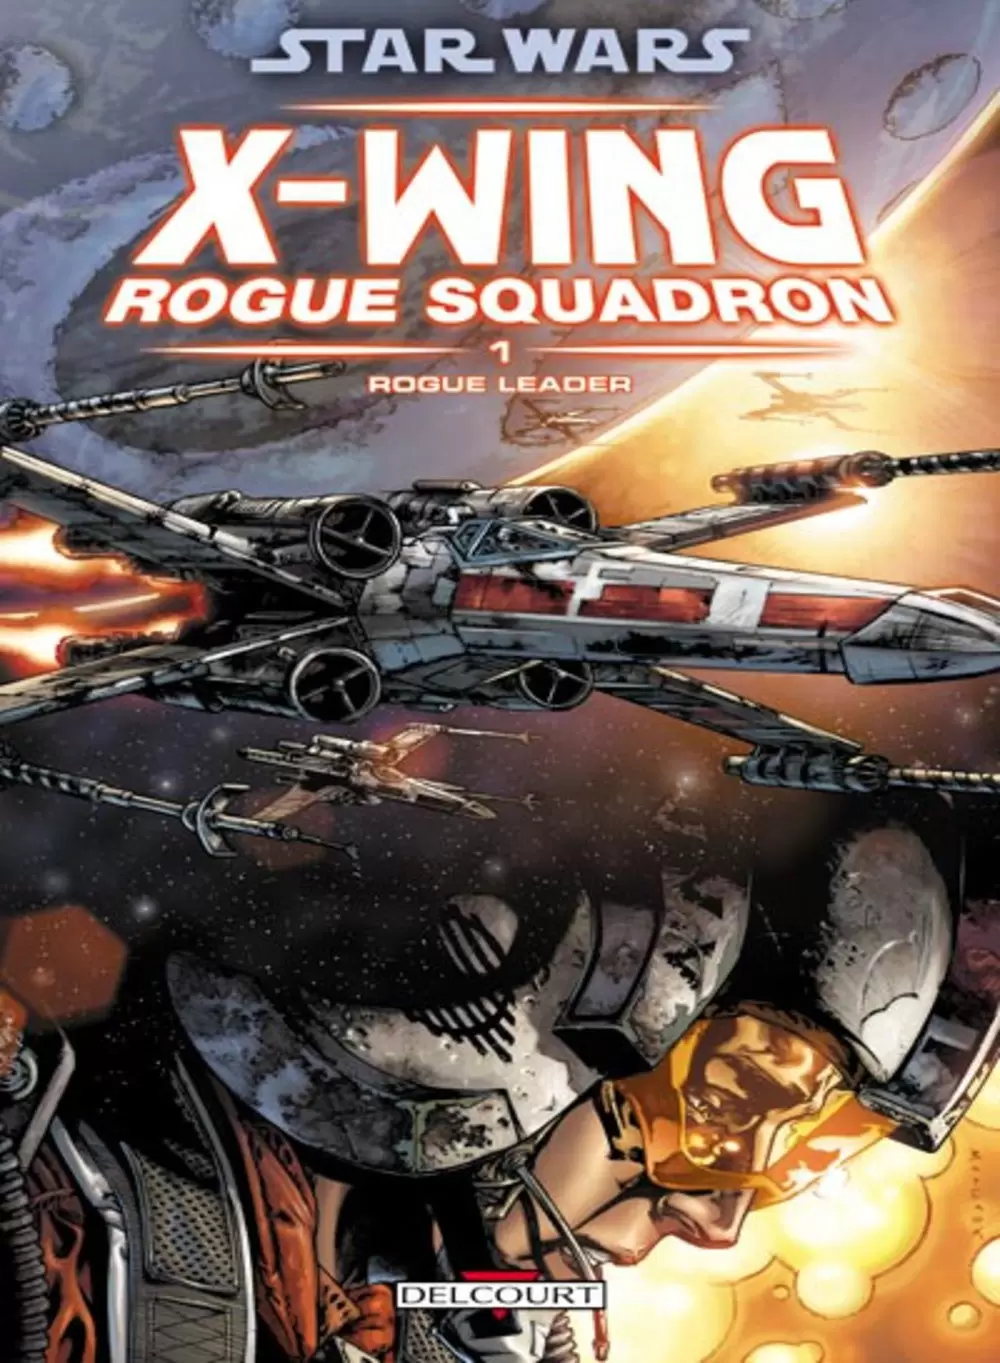 Star Wars - Delcourt - X-Wing Rogue Squadron : Rogue Leader